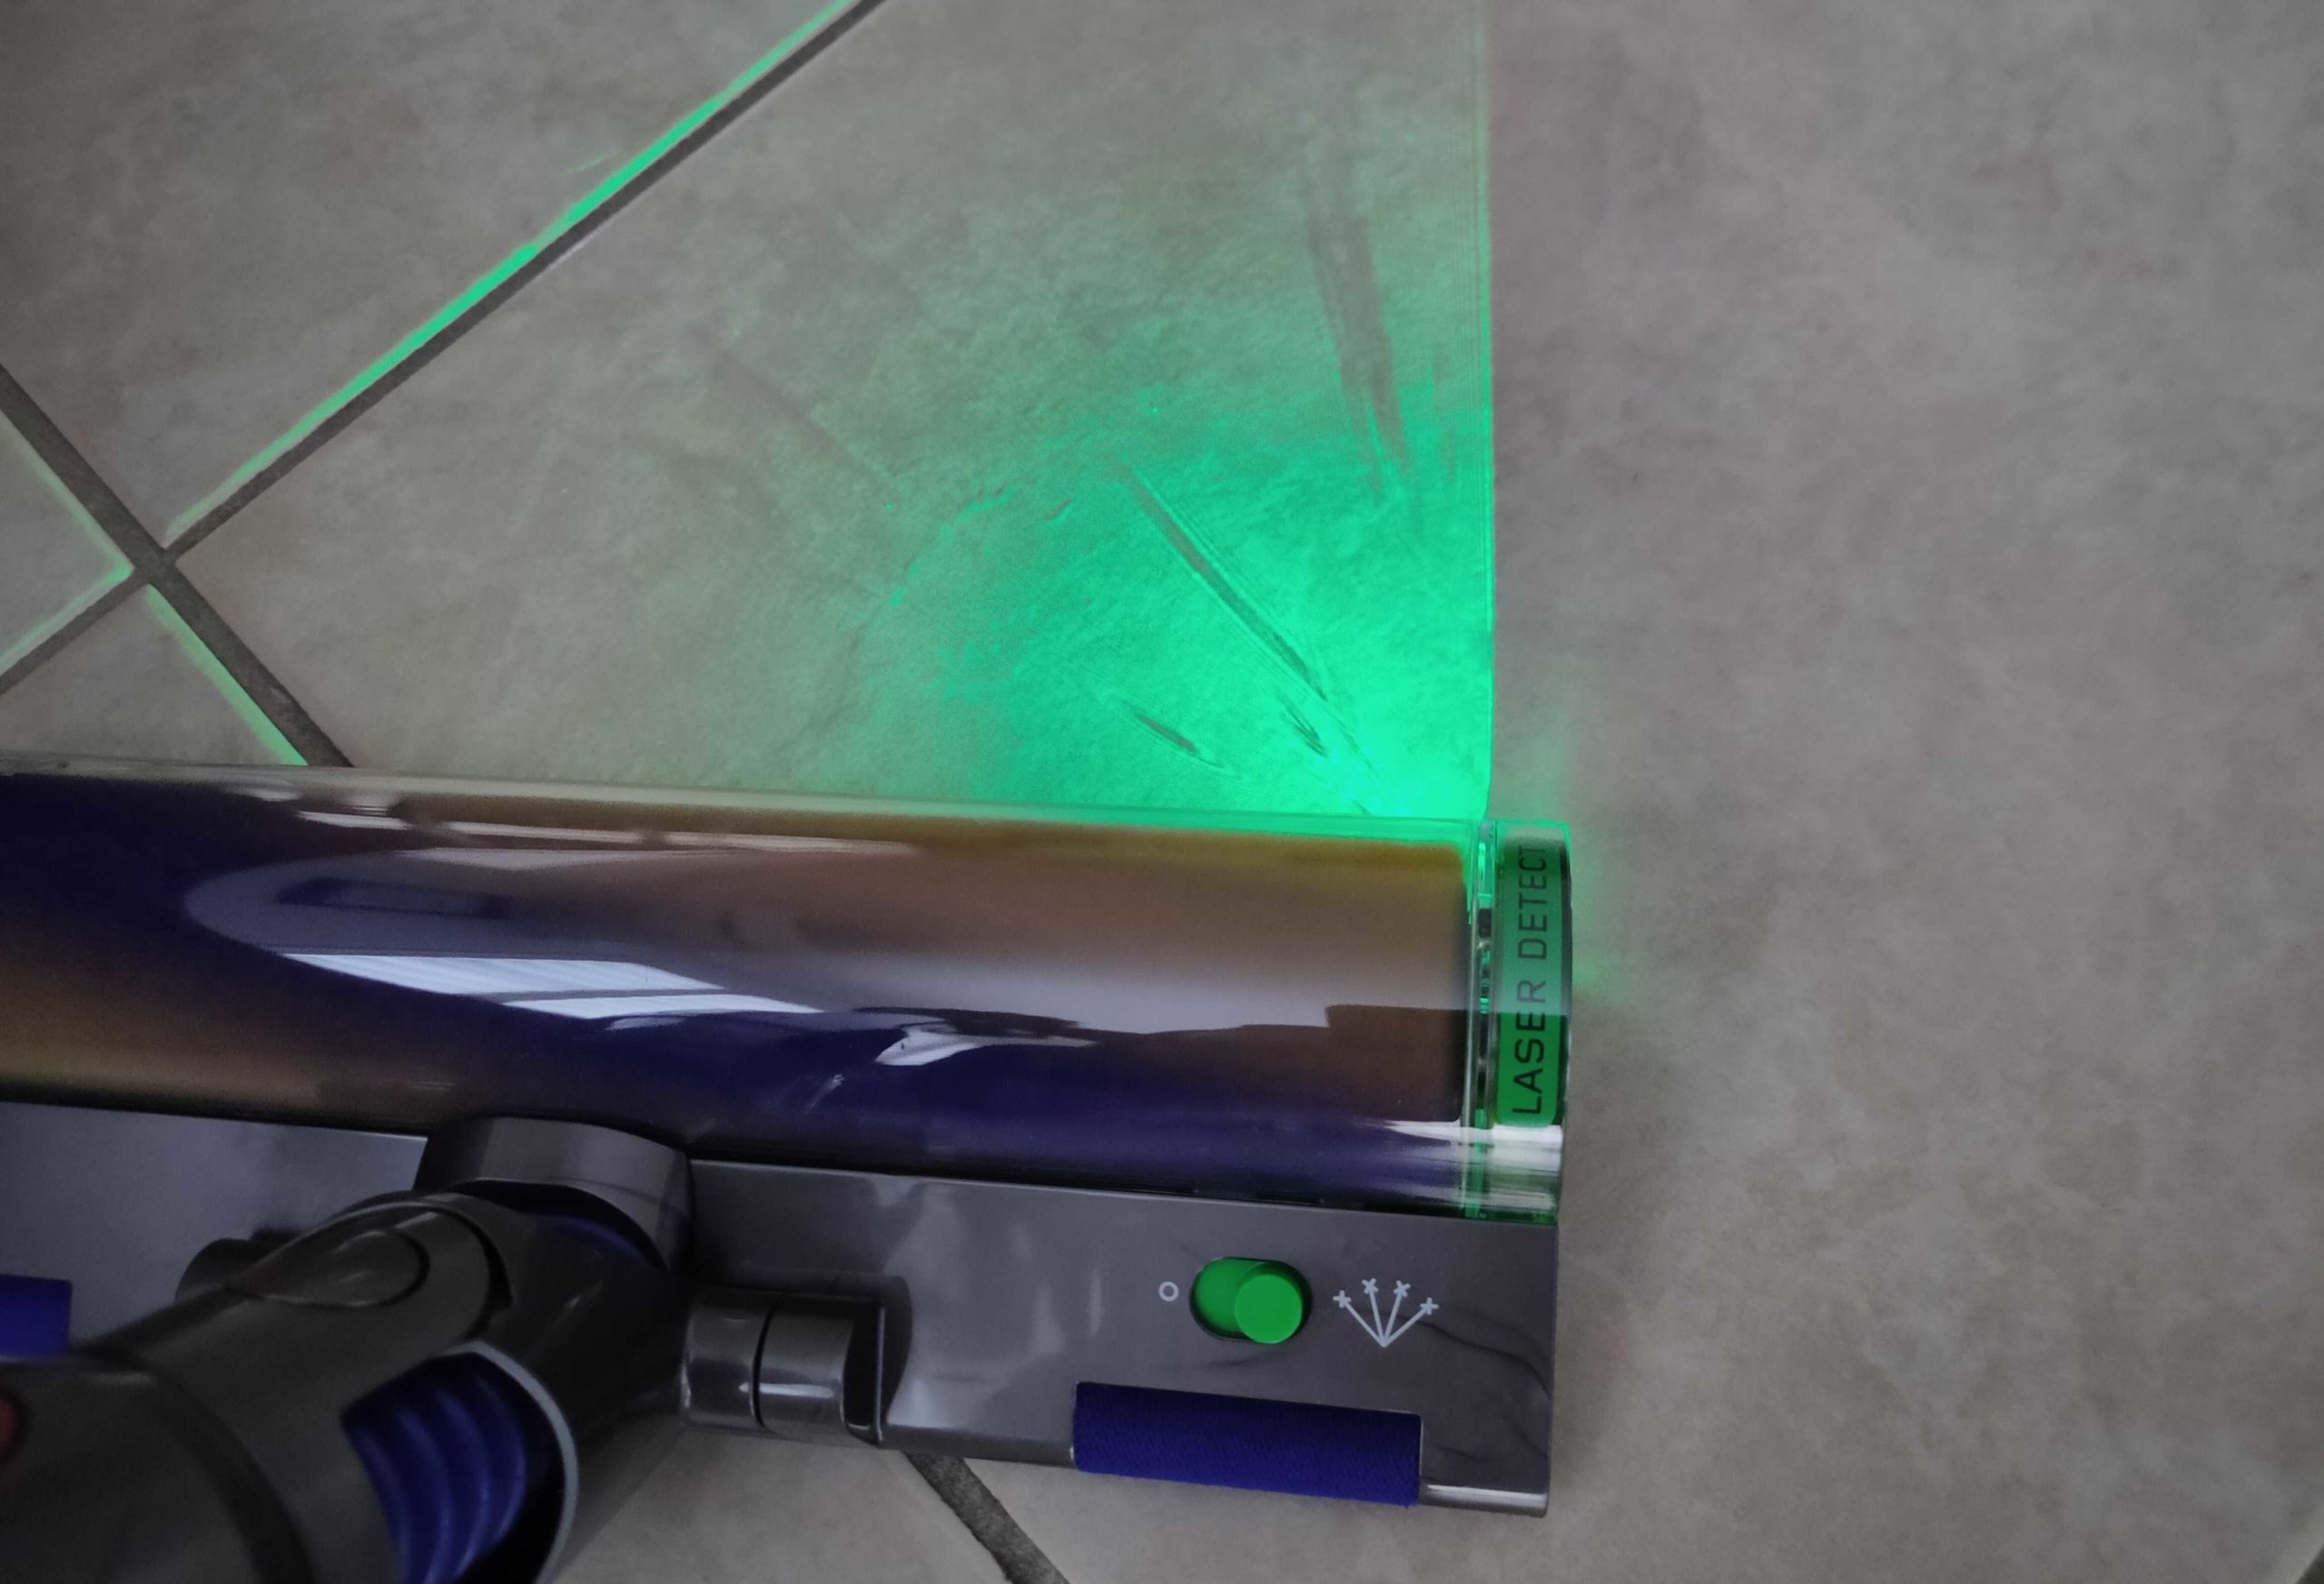 The Dyson V15 Detect's laser proved my apartment was never really